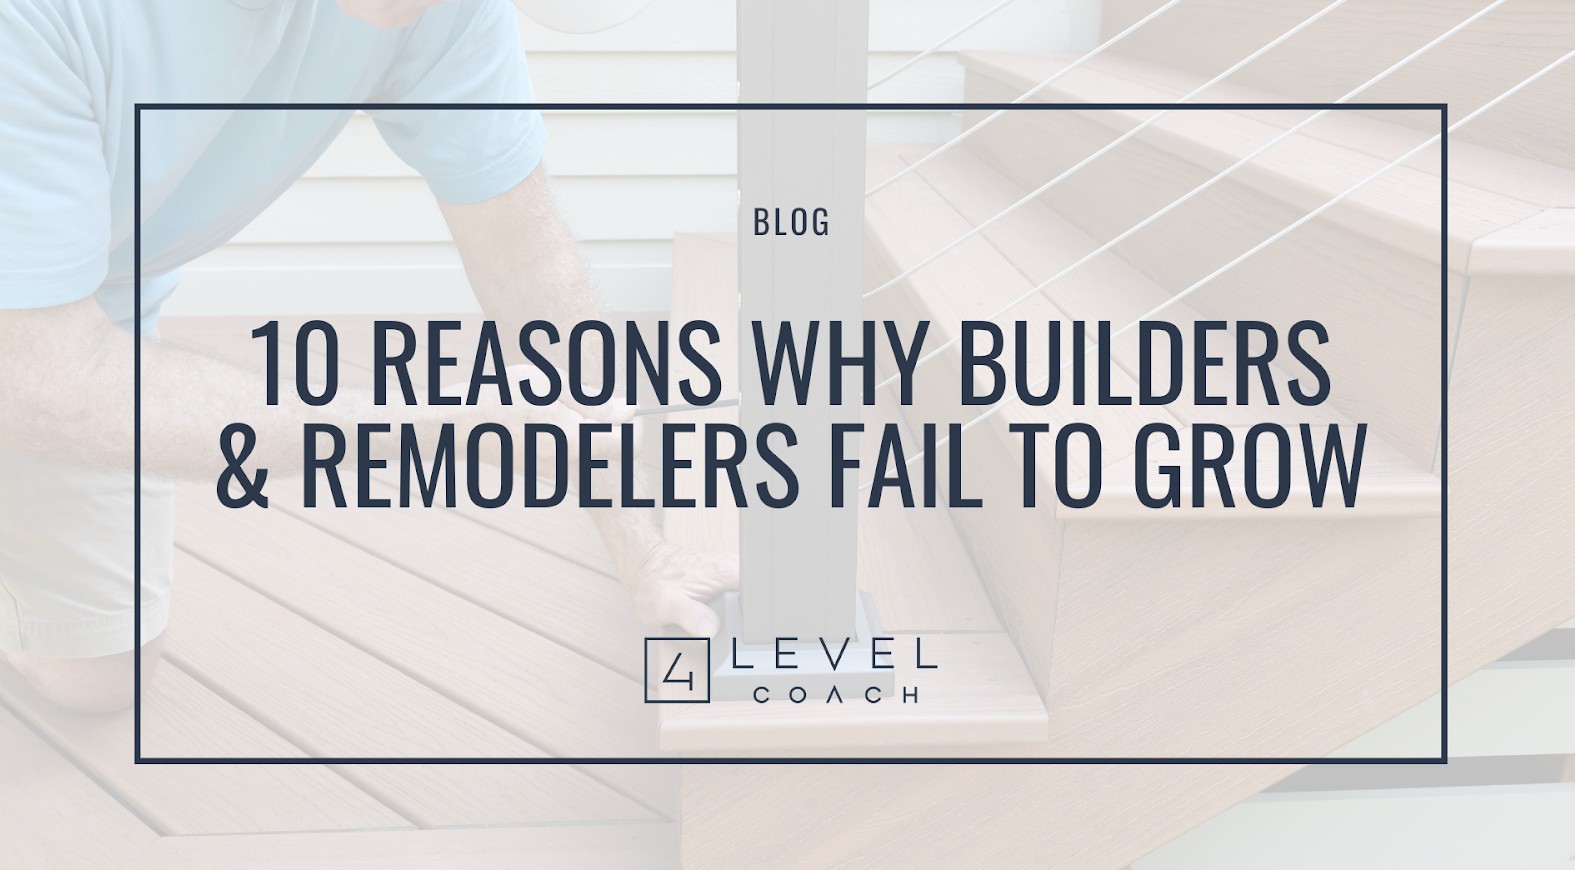 10 Reasons Why Builders and Remodelers Fail to Grow